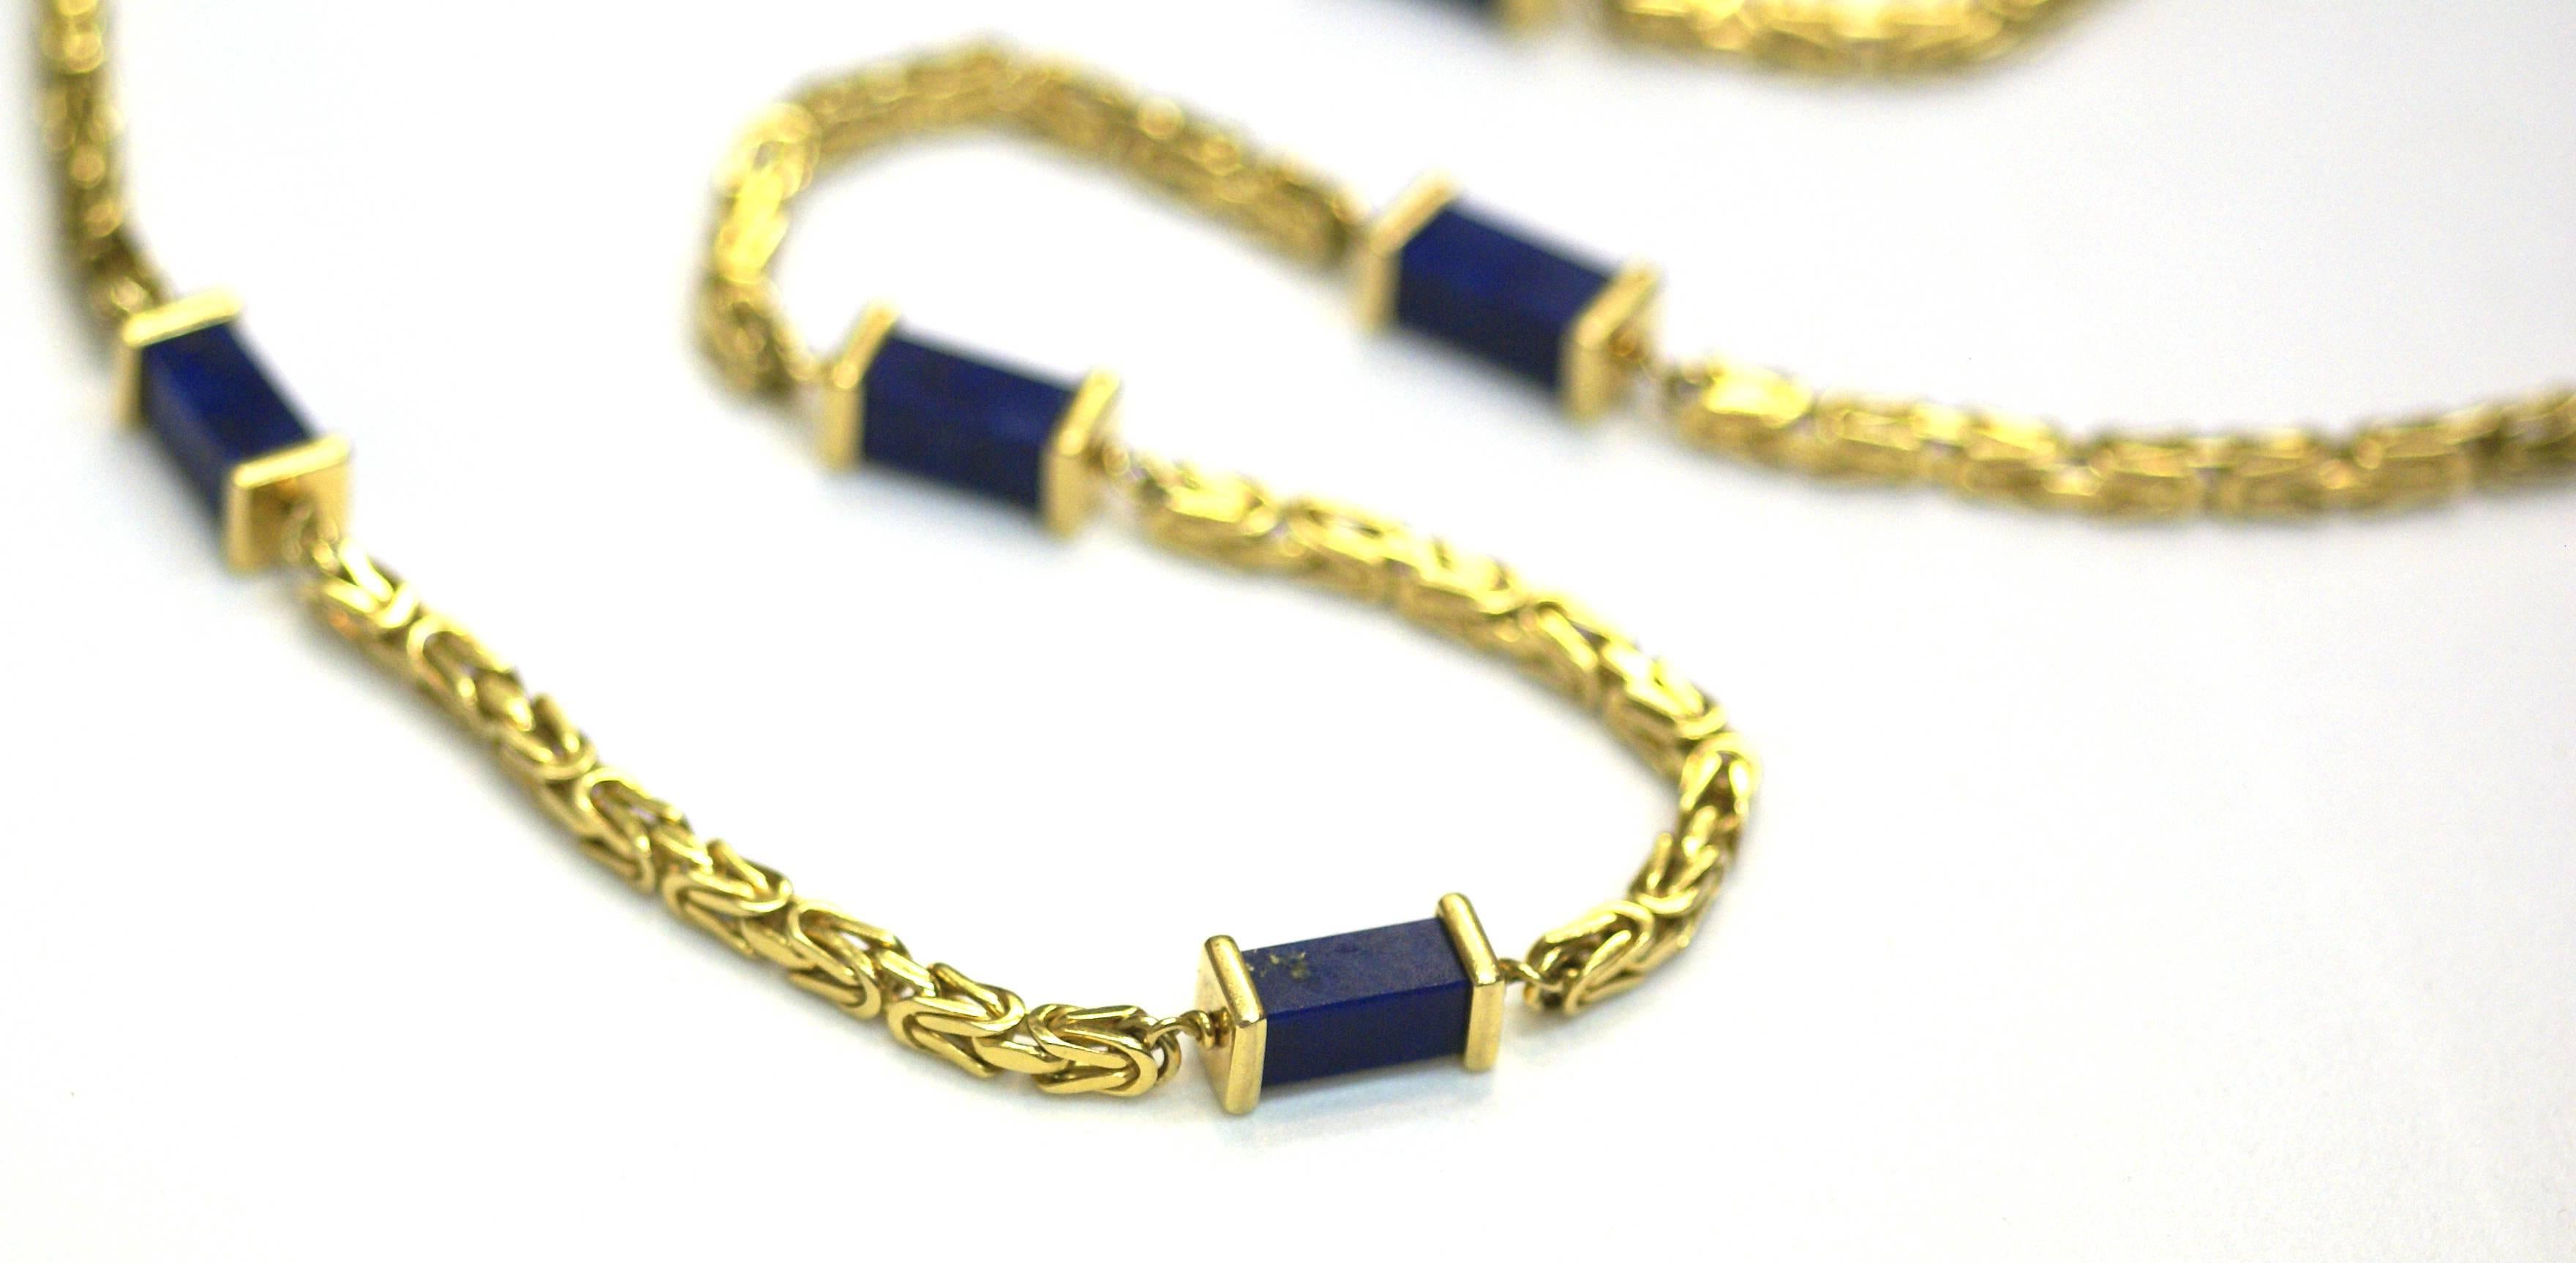 A chic long 18kt yellow gold chain of great substance, interlinked and enhances by elements of fine lapis lazuli. Made in Italy during the 1970s by Nicolis Cola, a primary jeweler from Vicenza.